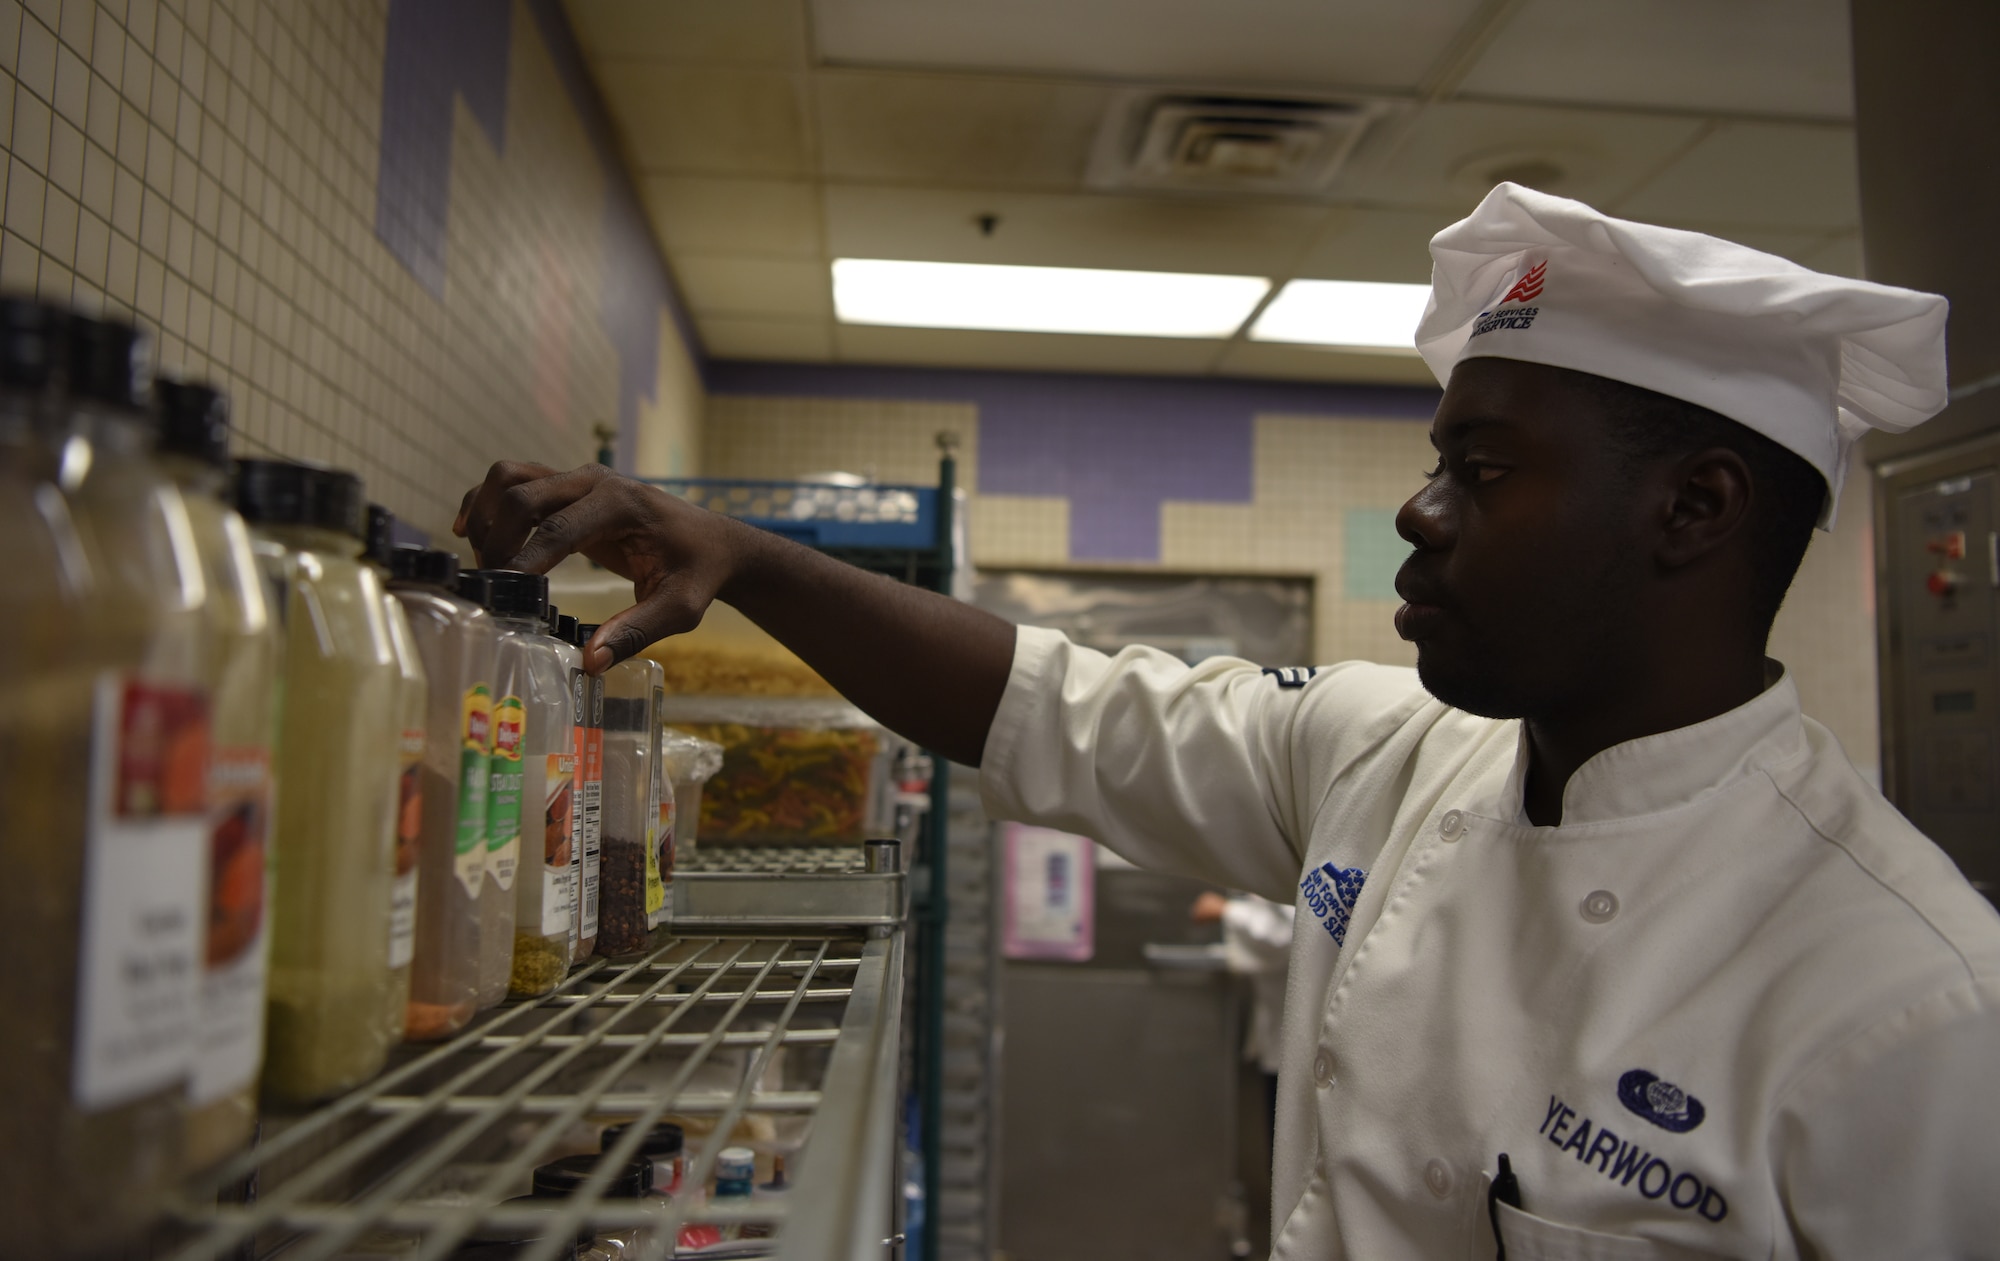 Airman 1st Class Kurt Yearwood, a 56th Force Support Squadron food service apprentice, searches through different spices as he prepares a freshly cooked dinner at the Hensman Dining Facility June 7, 2018 at Luke Air Force Base, Ariz.